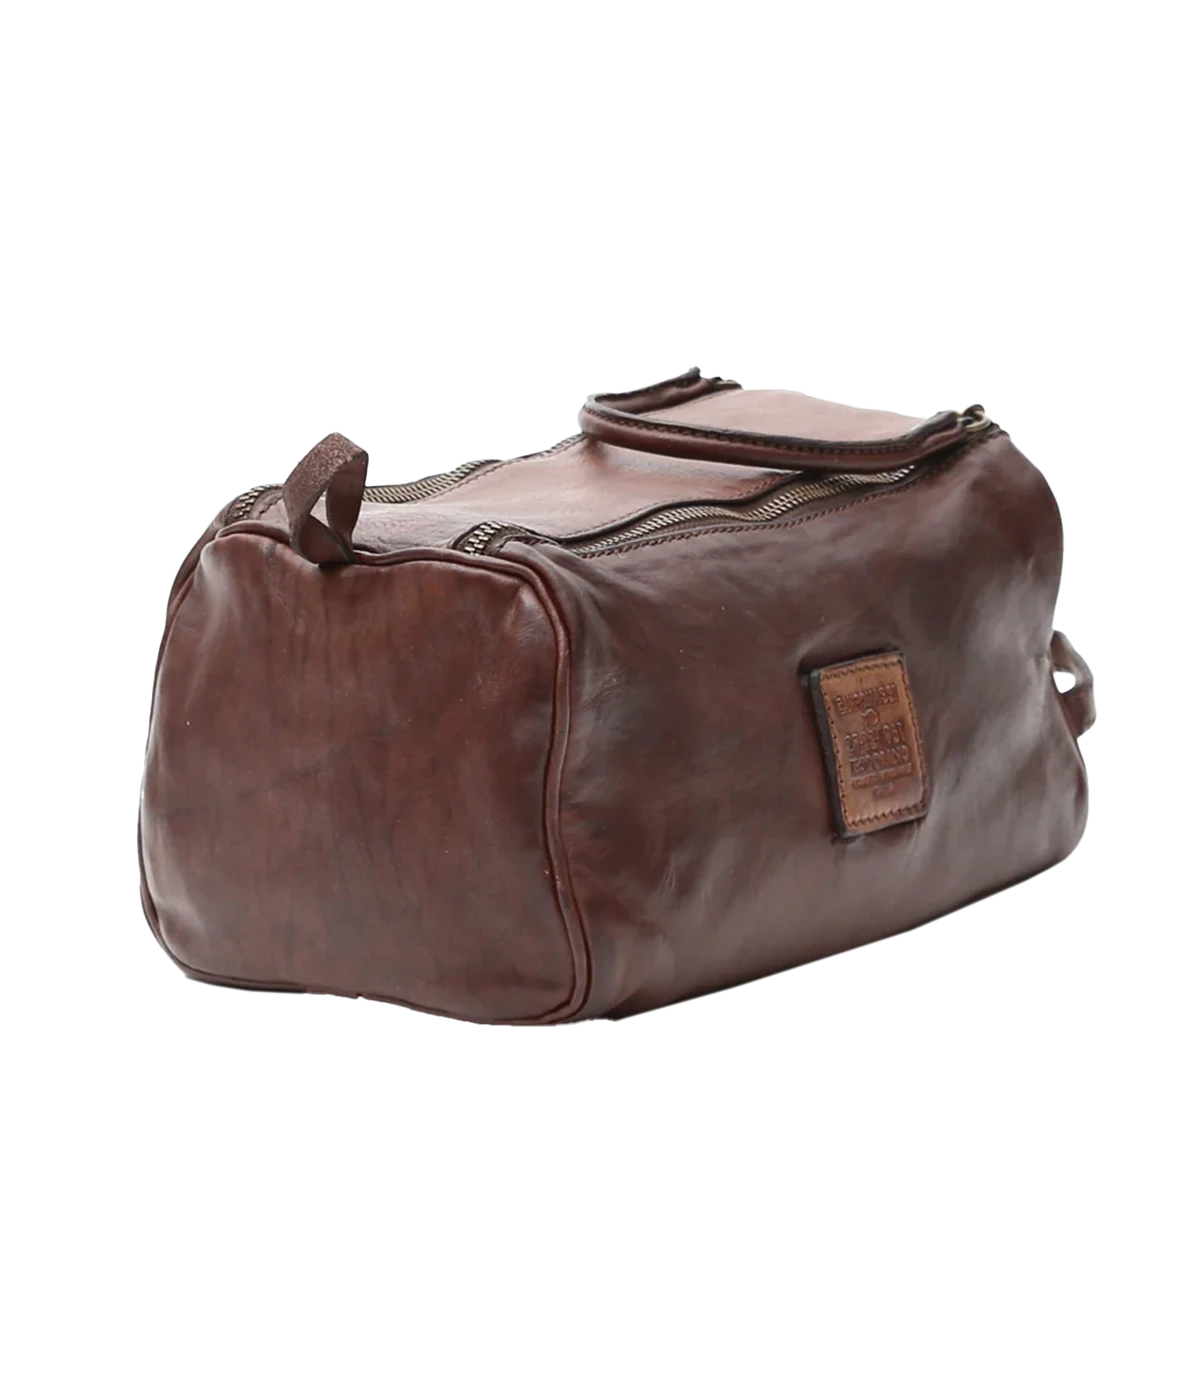 Leather Toiletries Bag in Brown